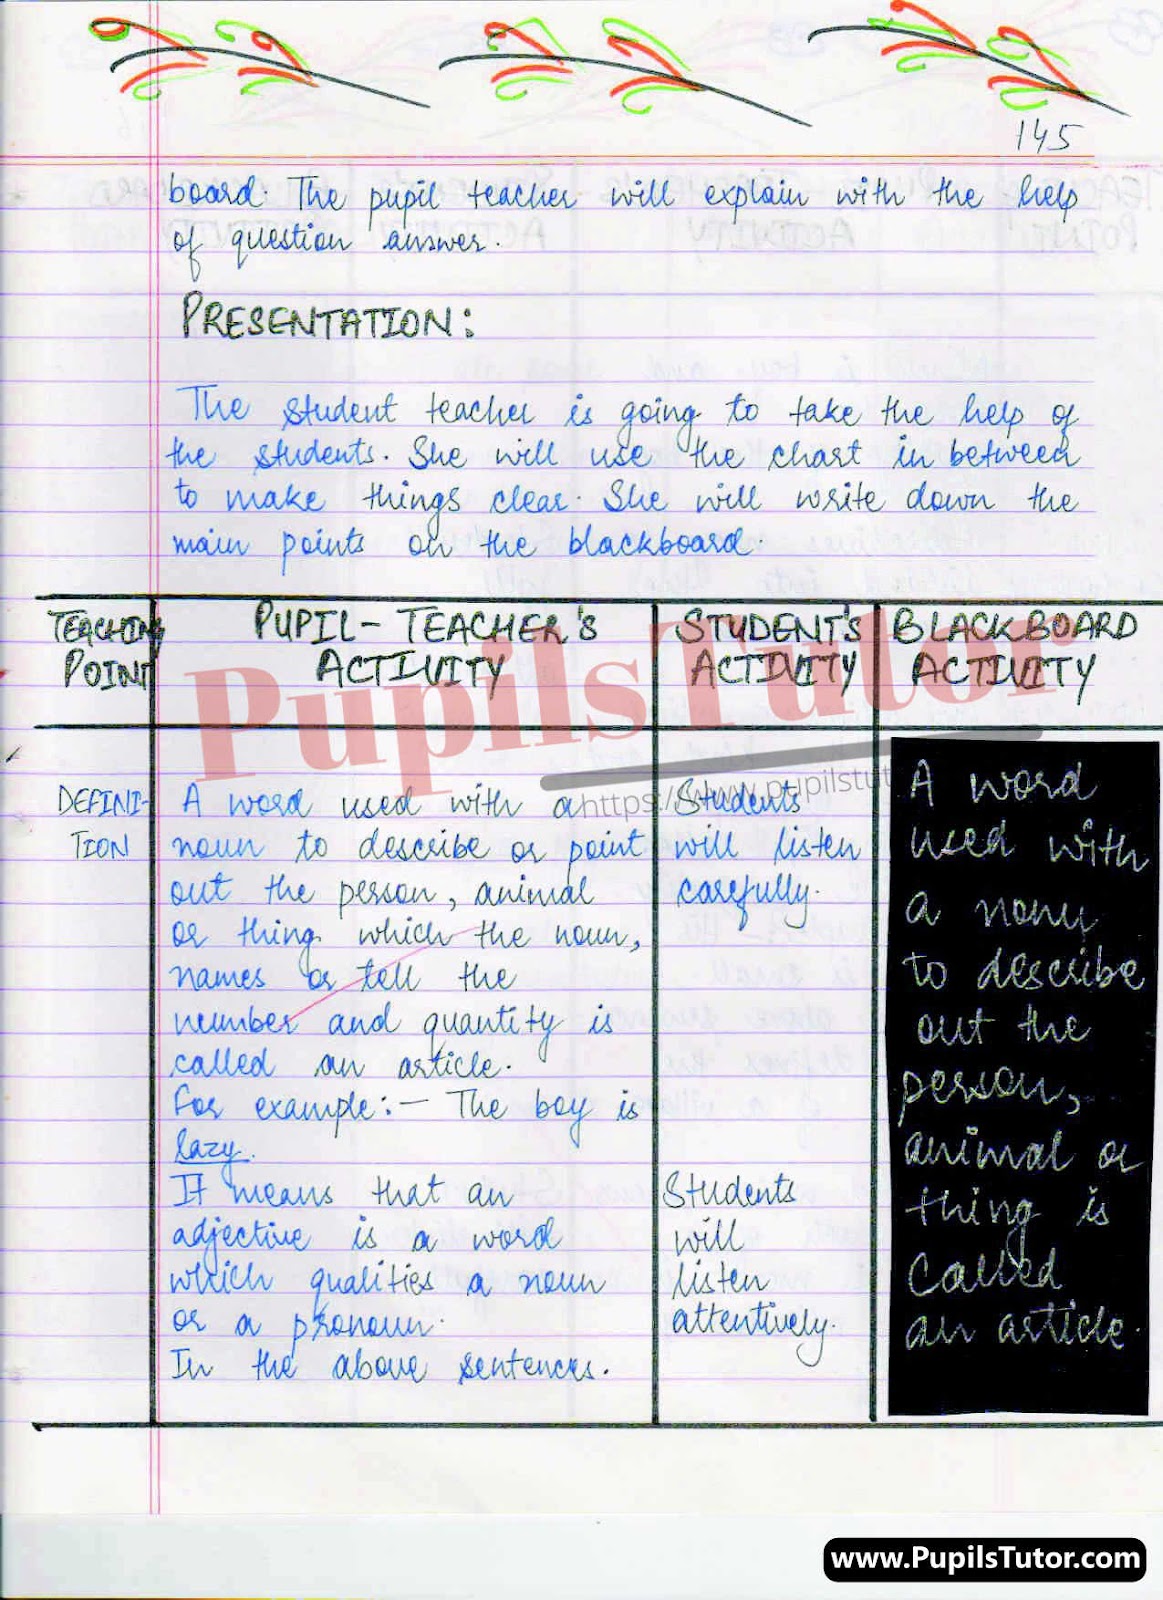 Class/Grade 10 English Lesson Plan On Adjectives For CBSE NCERT KVS School And University College Teachers – (Page And Image Number 3) – www.pupilstutor.com